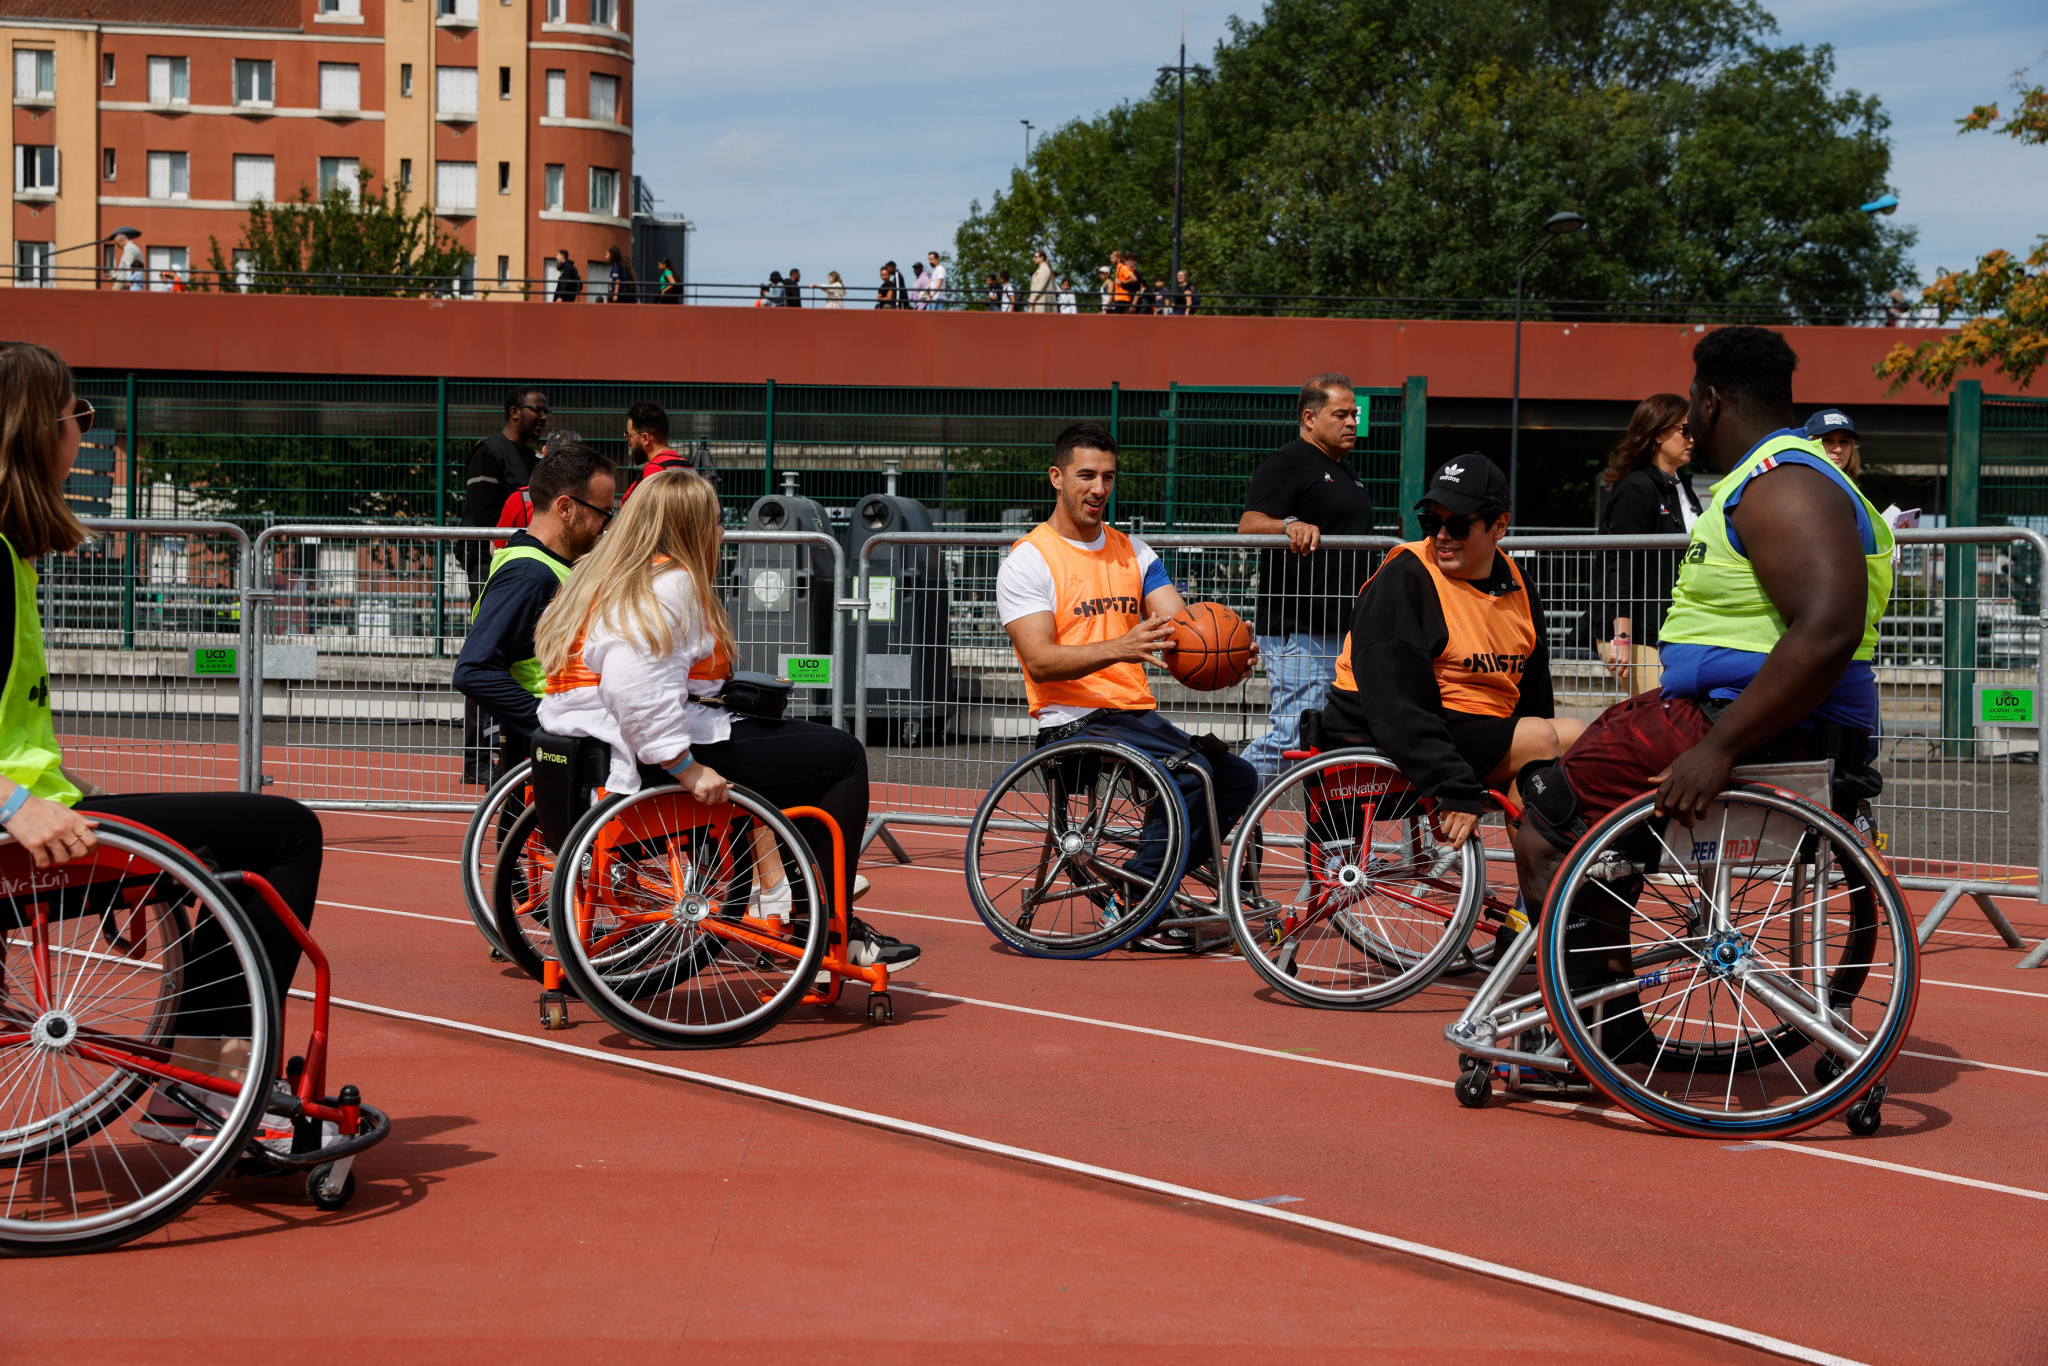 Wheelchair basketball players took part in a demonstration today ©Paris 2024